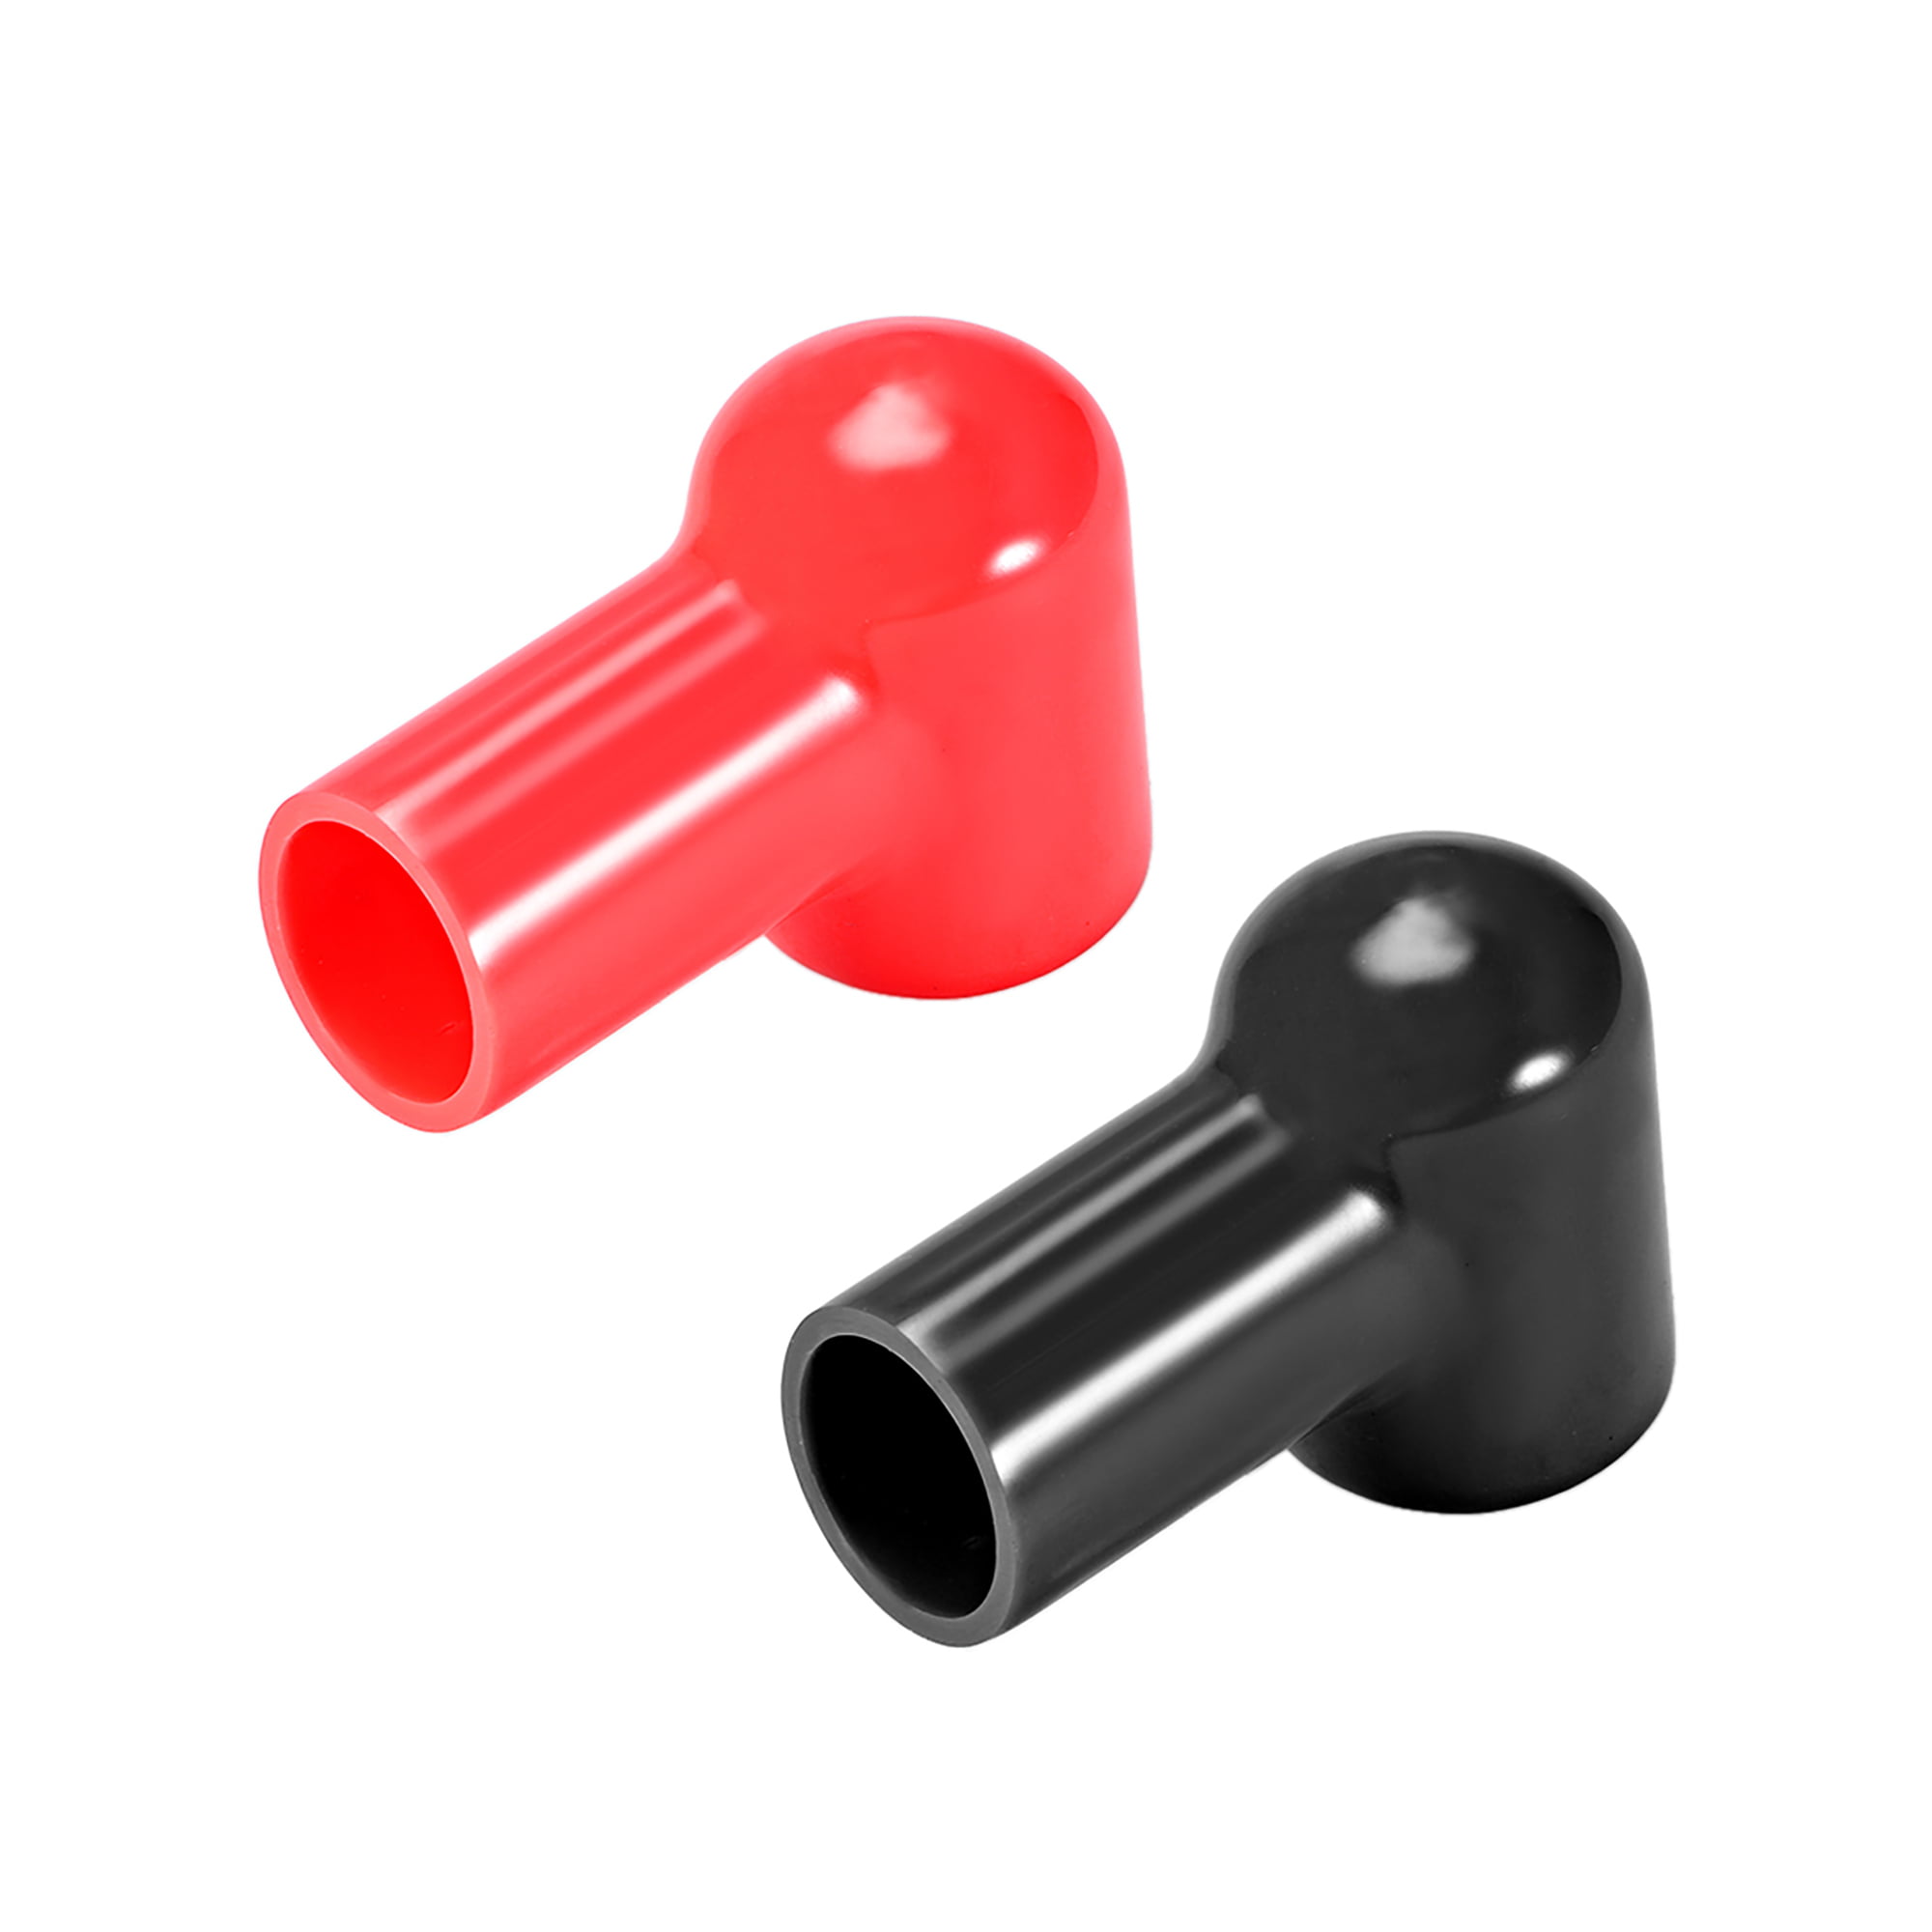 Details about   Battery Terminal Insulating Rubber Protector Covers 22mmx12mm Red Black 1 Pair 